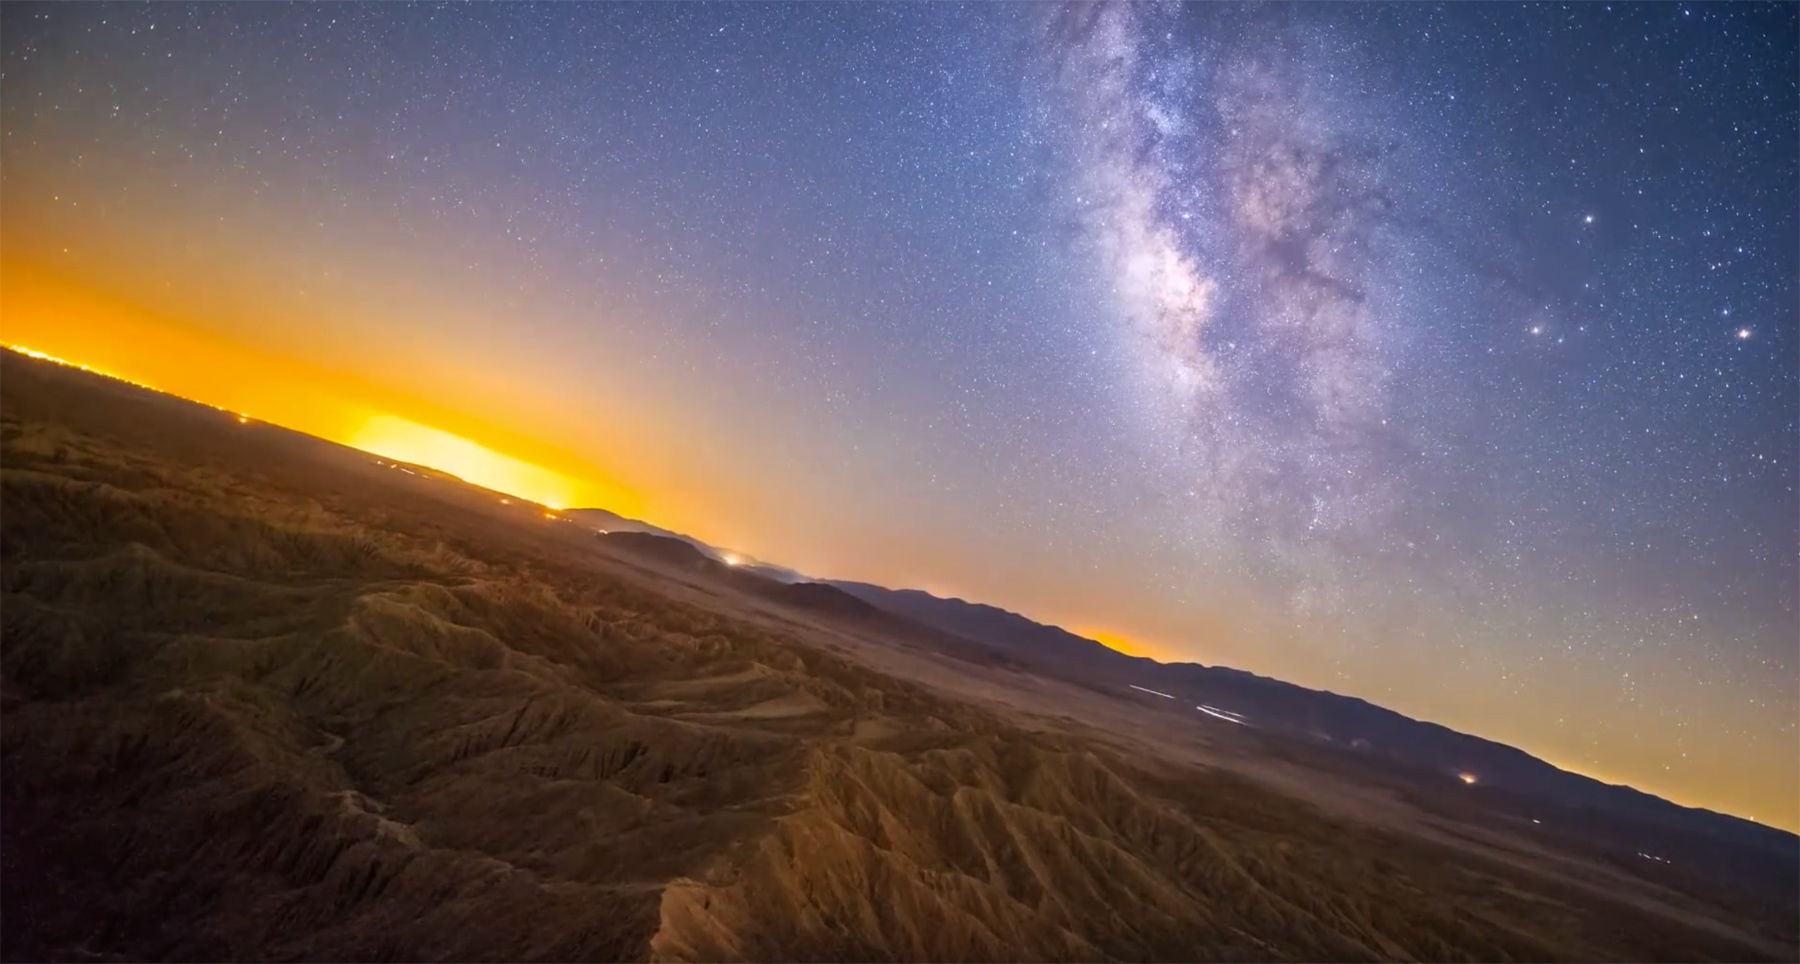 A frame from the time-lapse video “Font's Point - Stabilized Sky Timelapse”. Credit: Eric Brummel